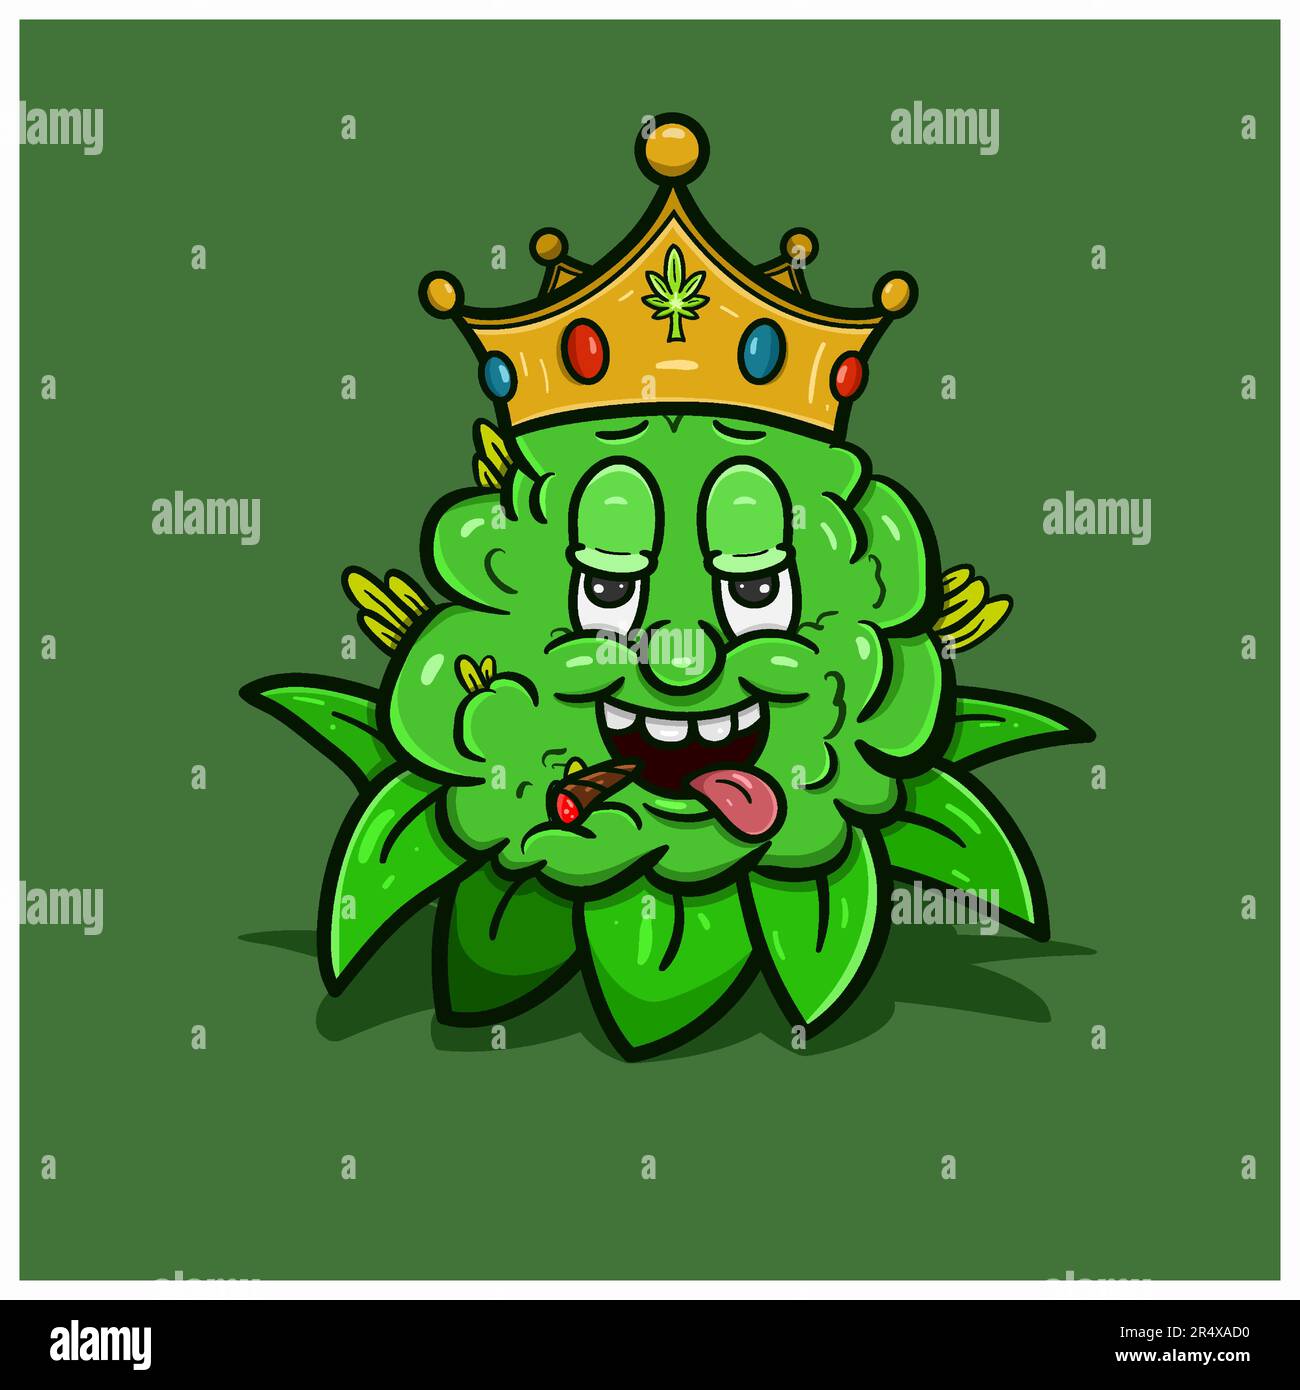 Cartoon Mascot Of Weed Bud Wearing Crown. Suitable for Brand, Logo, Sticker, t-shirt Design and other Product. Vector And Illustration Stock Vector